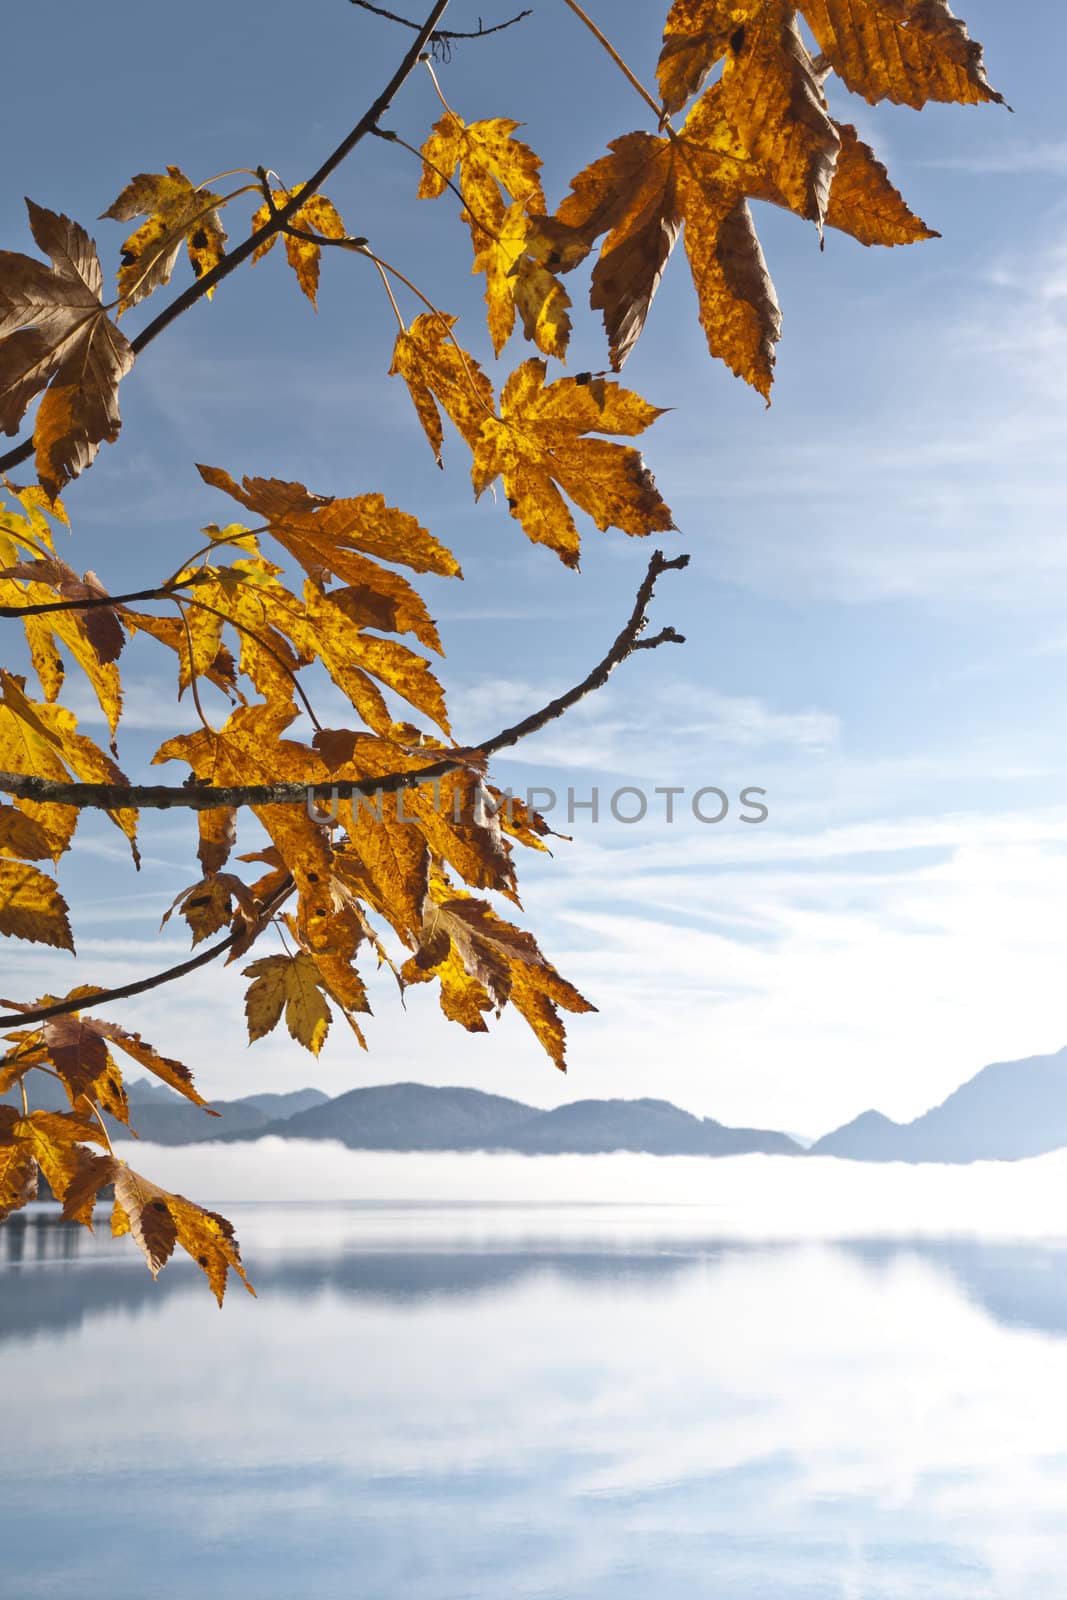 An image of a nice autumn leaf background